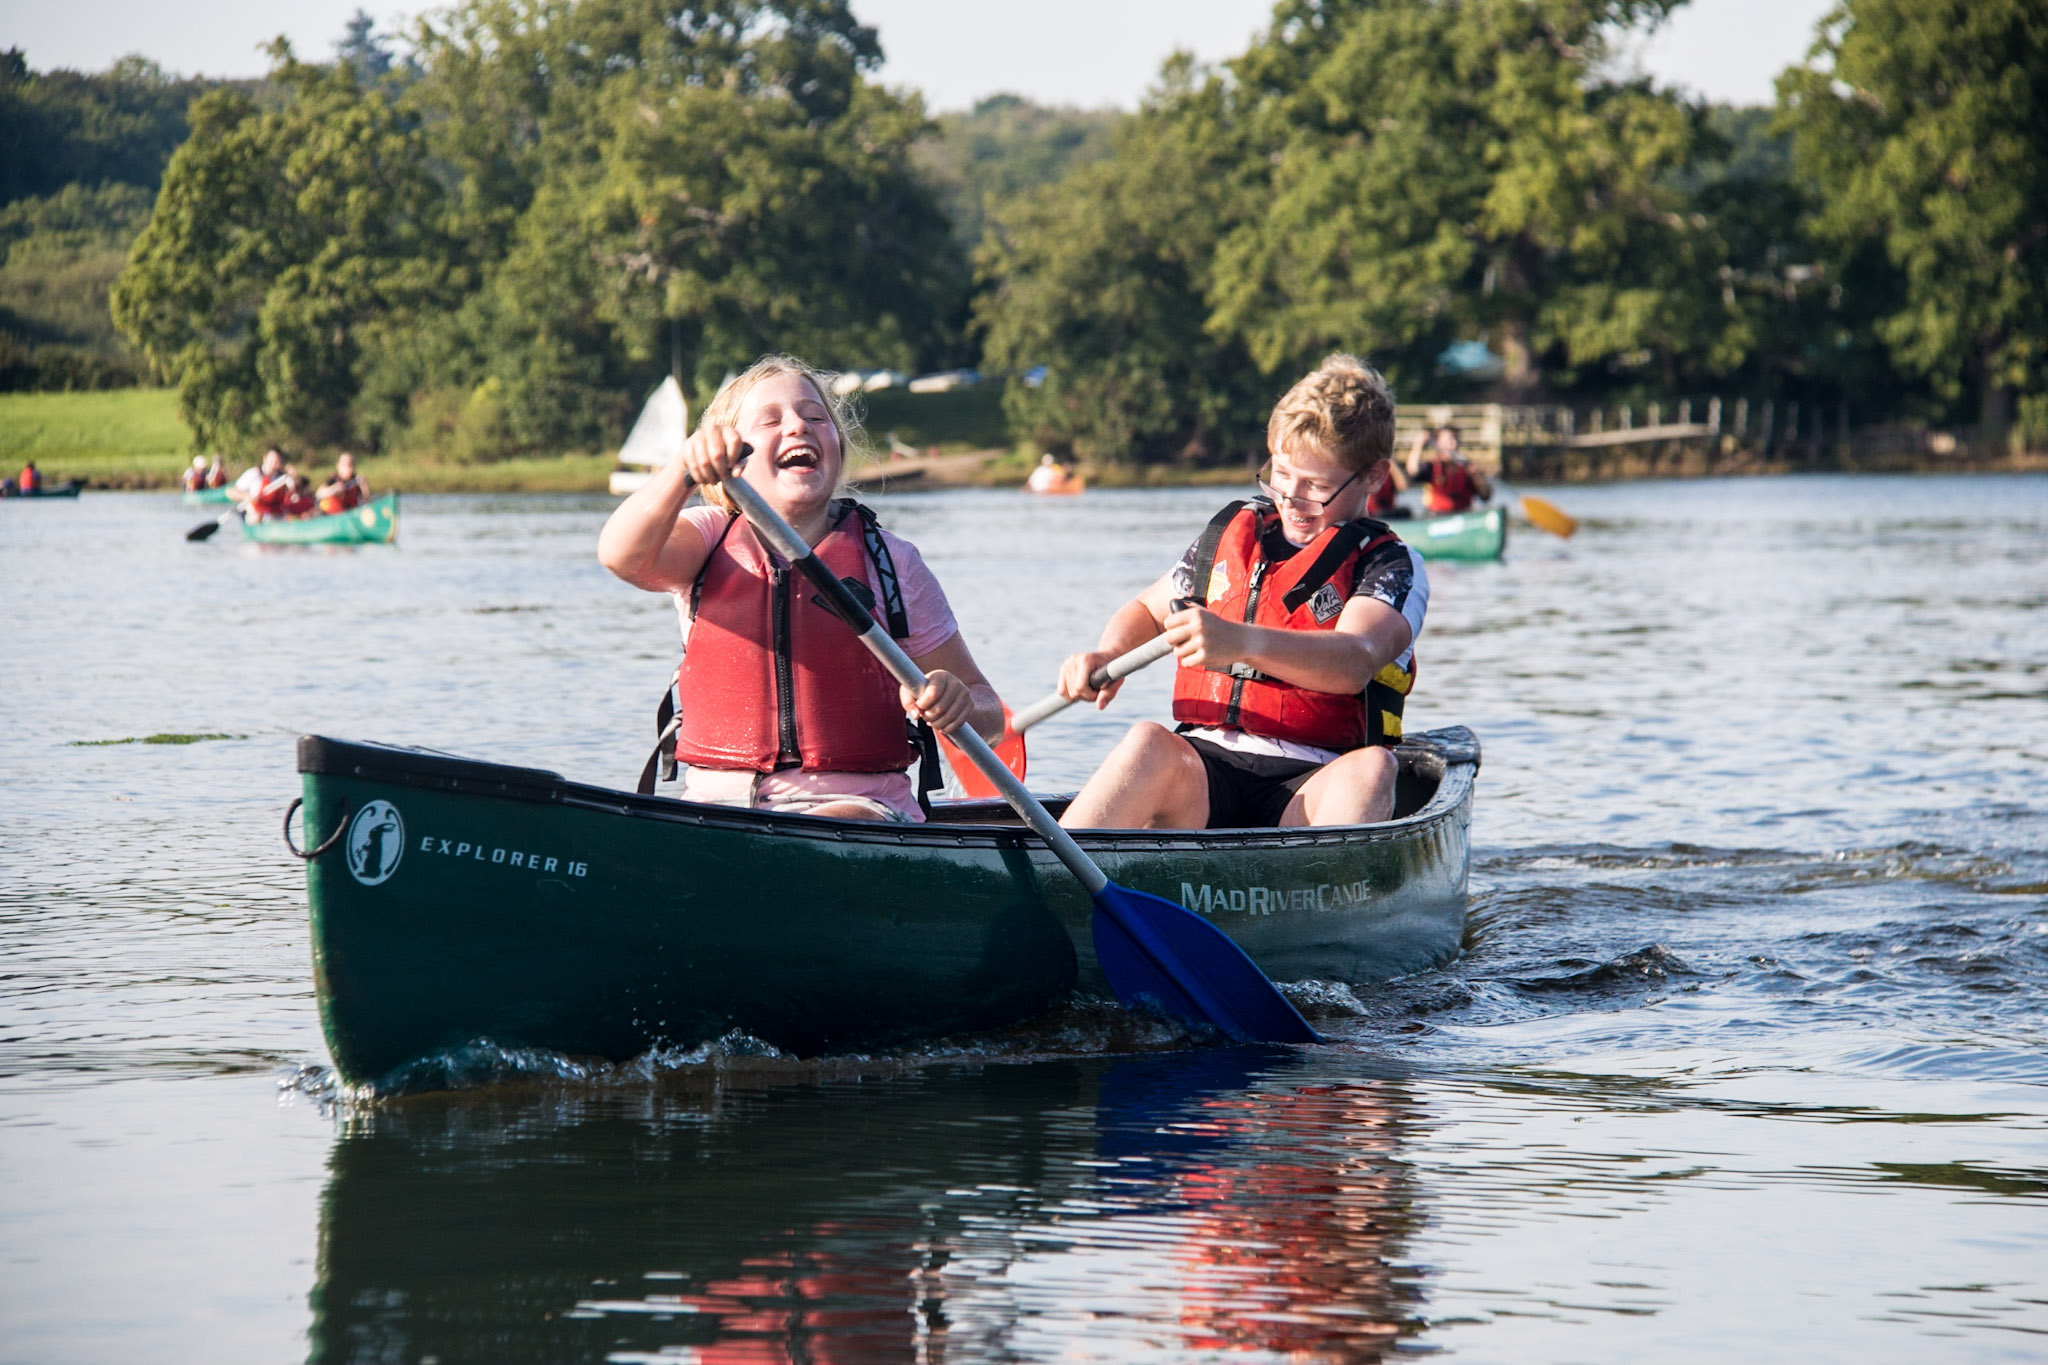 Two students canoeing on the Beaulieu River suring their residential trip in The New Forest